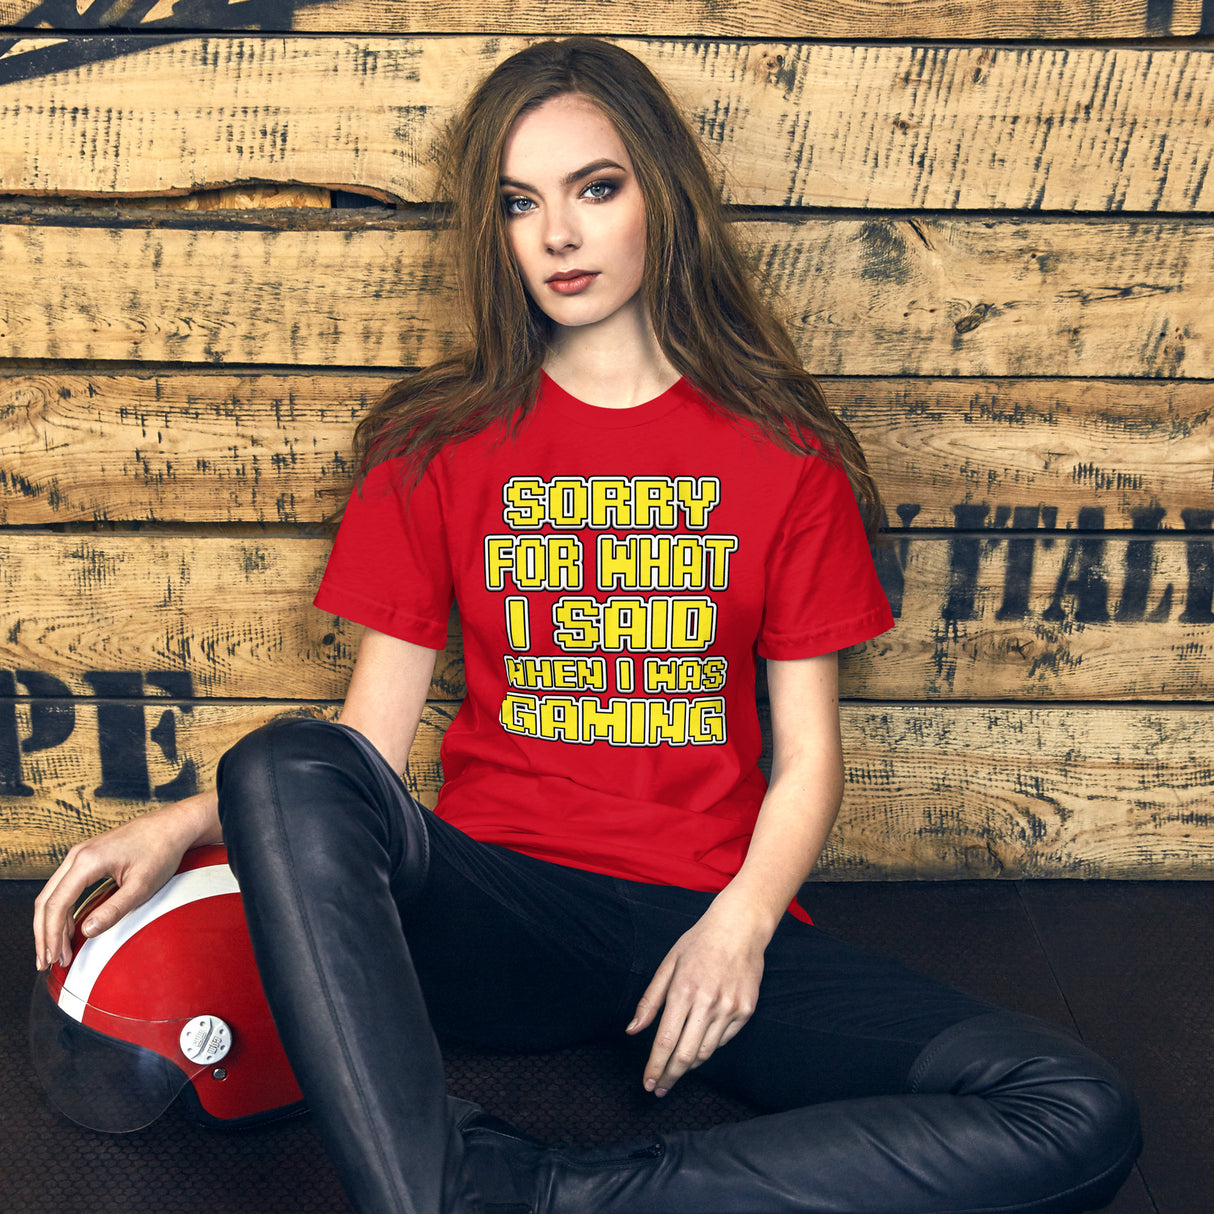 Sorry For What I Said When I Was Gaming Women's Shirt